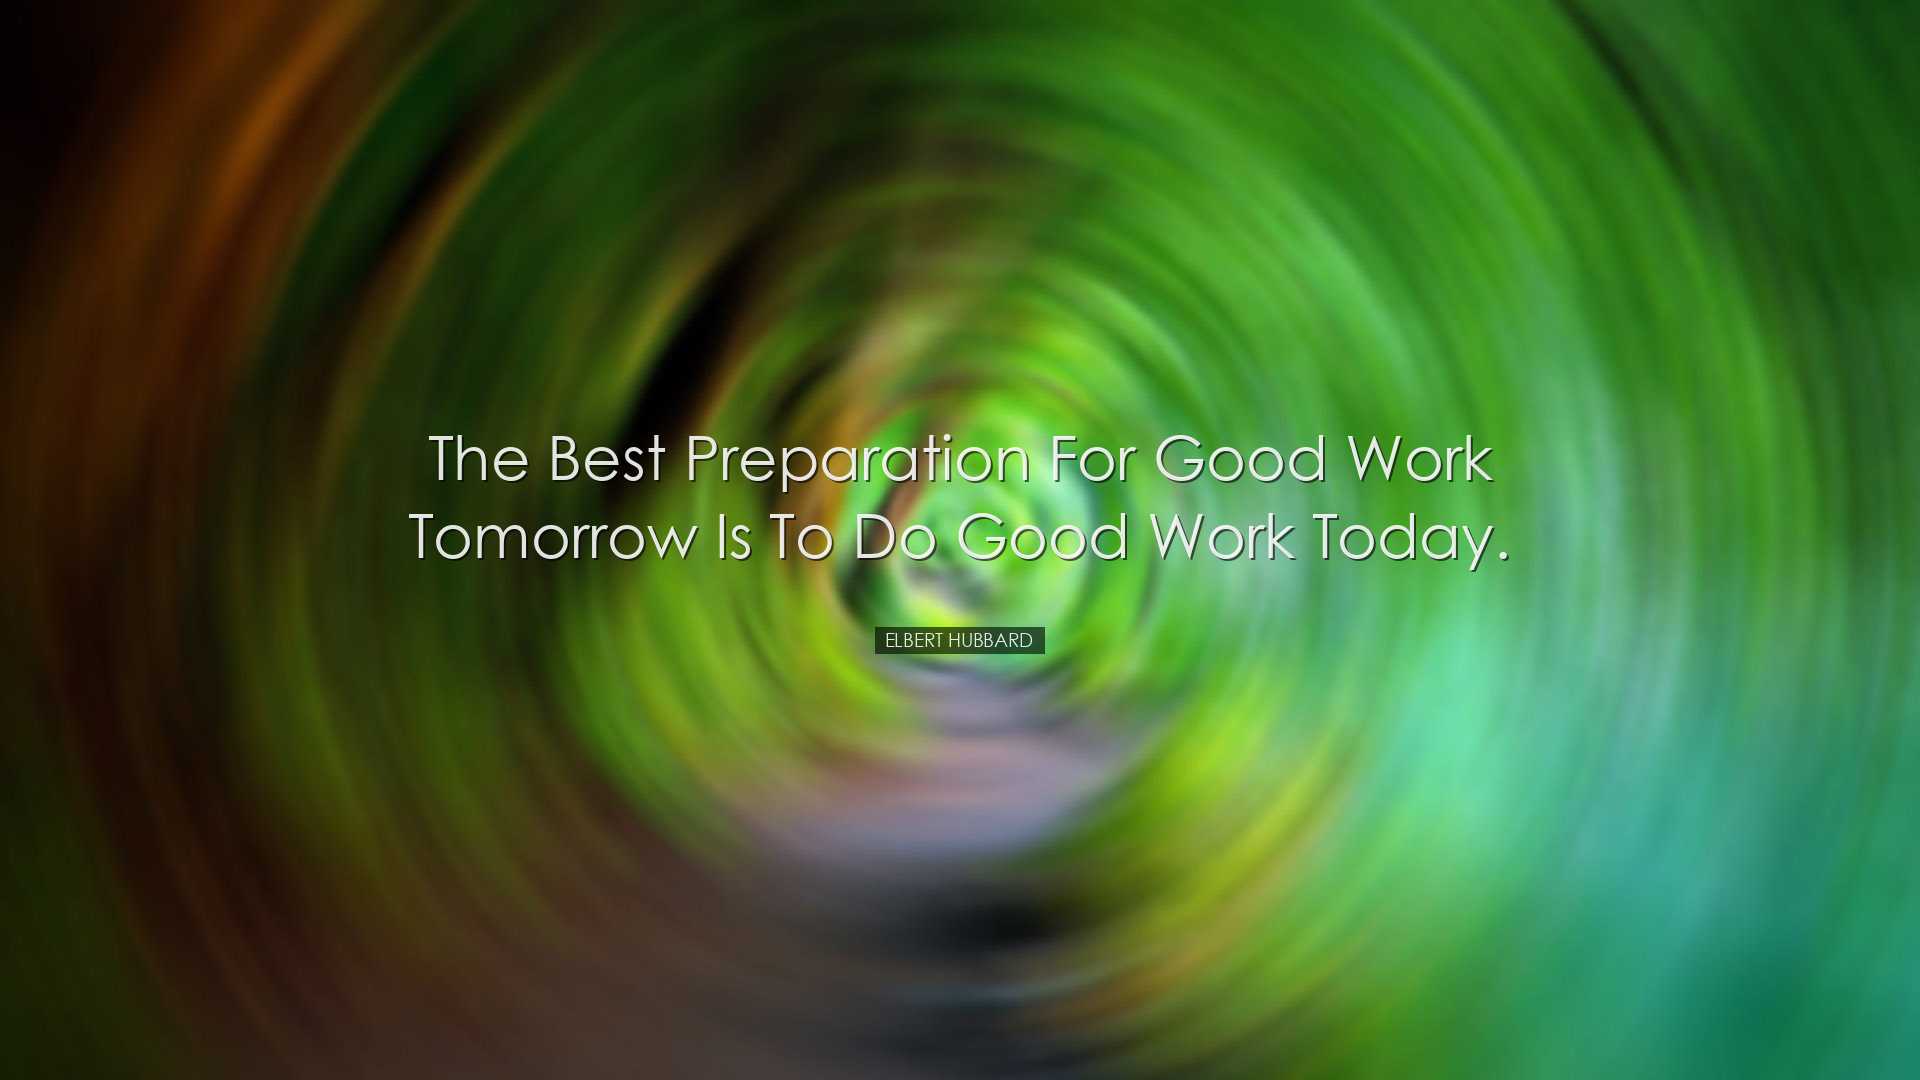 The best preparation for good work tomorrow is to do good work tod